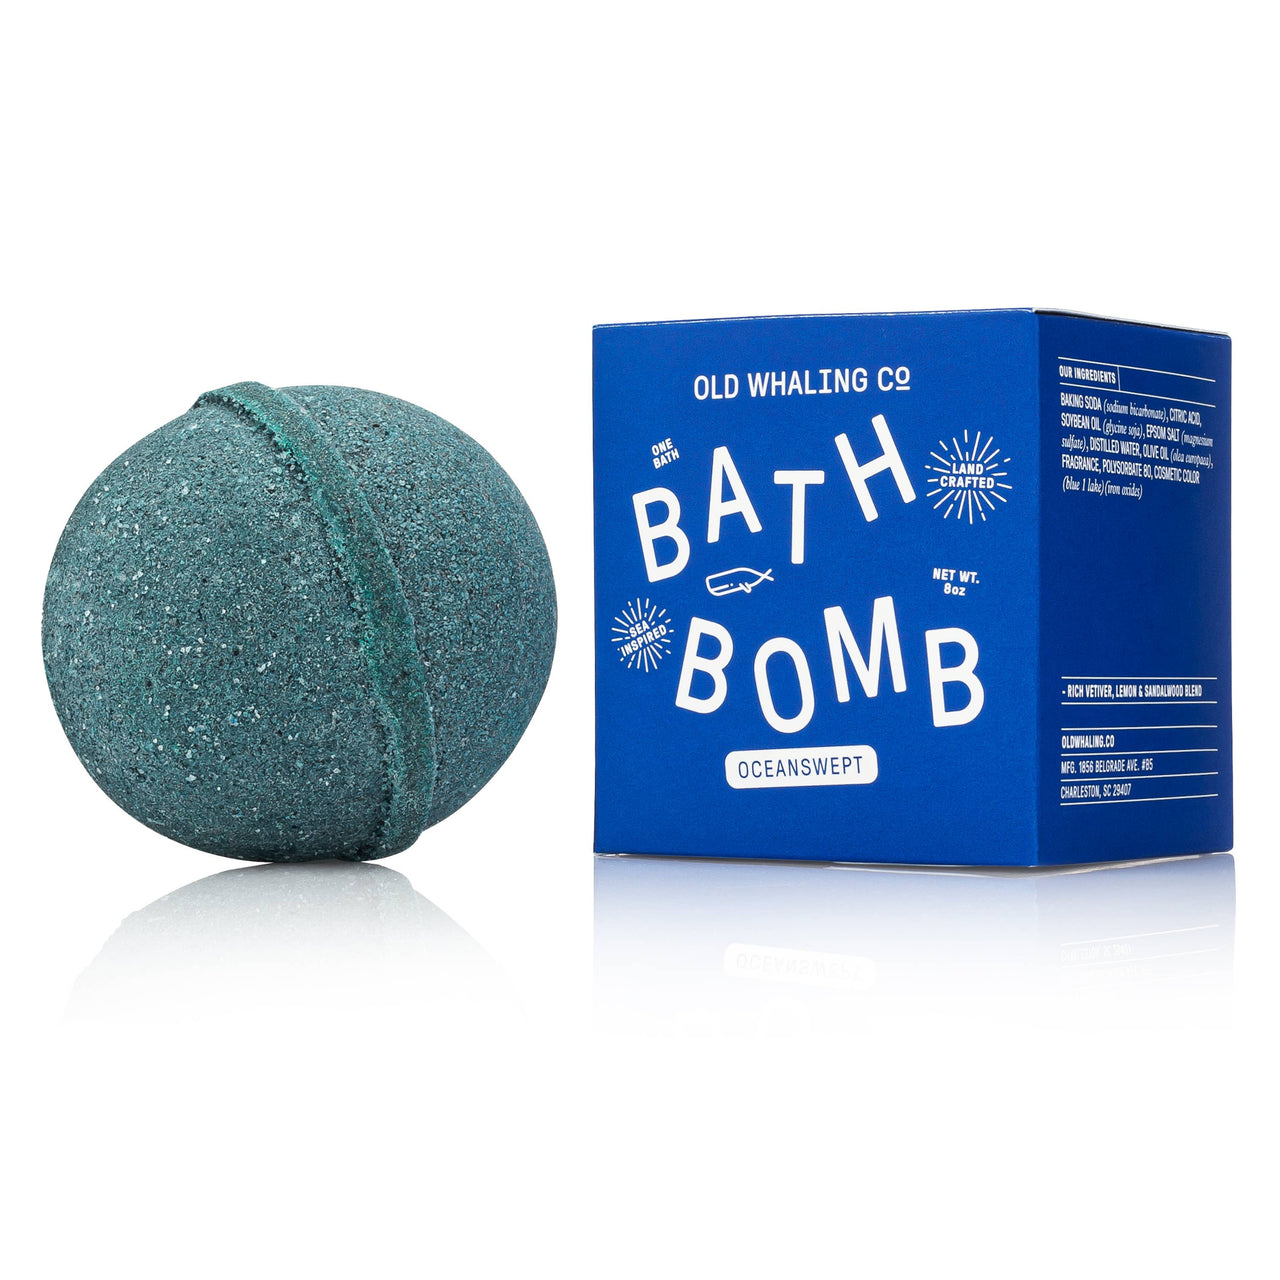 Oceanswept Bath Bomb  Old Whaling Company   